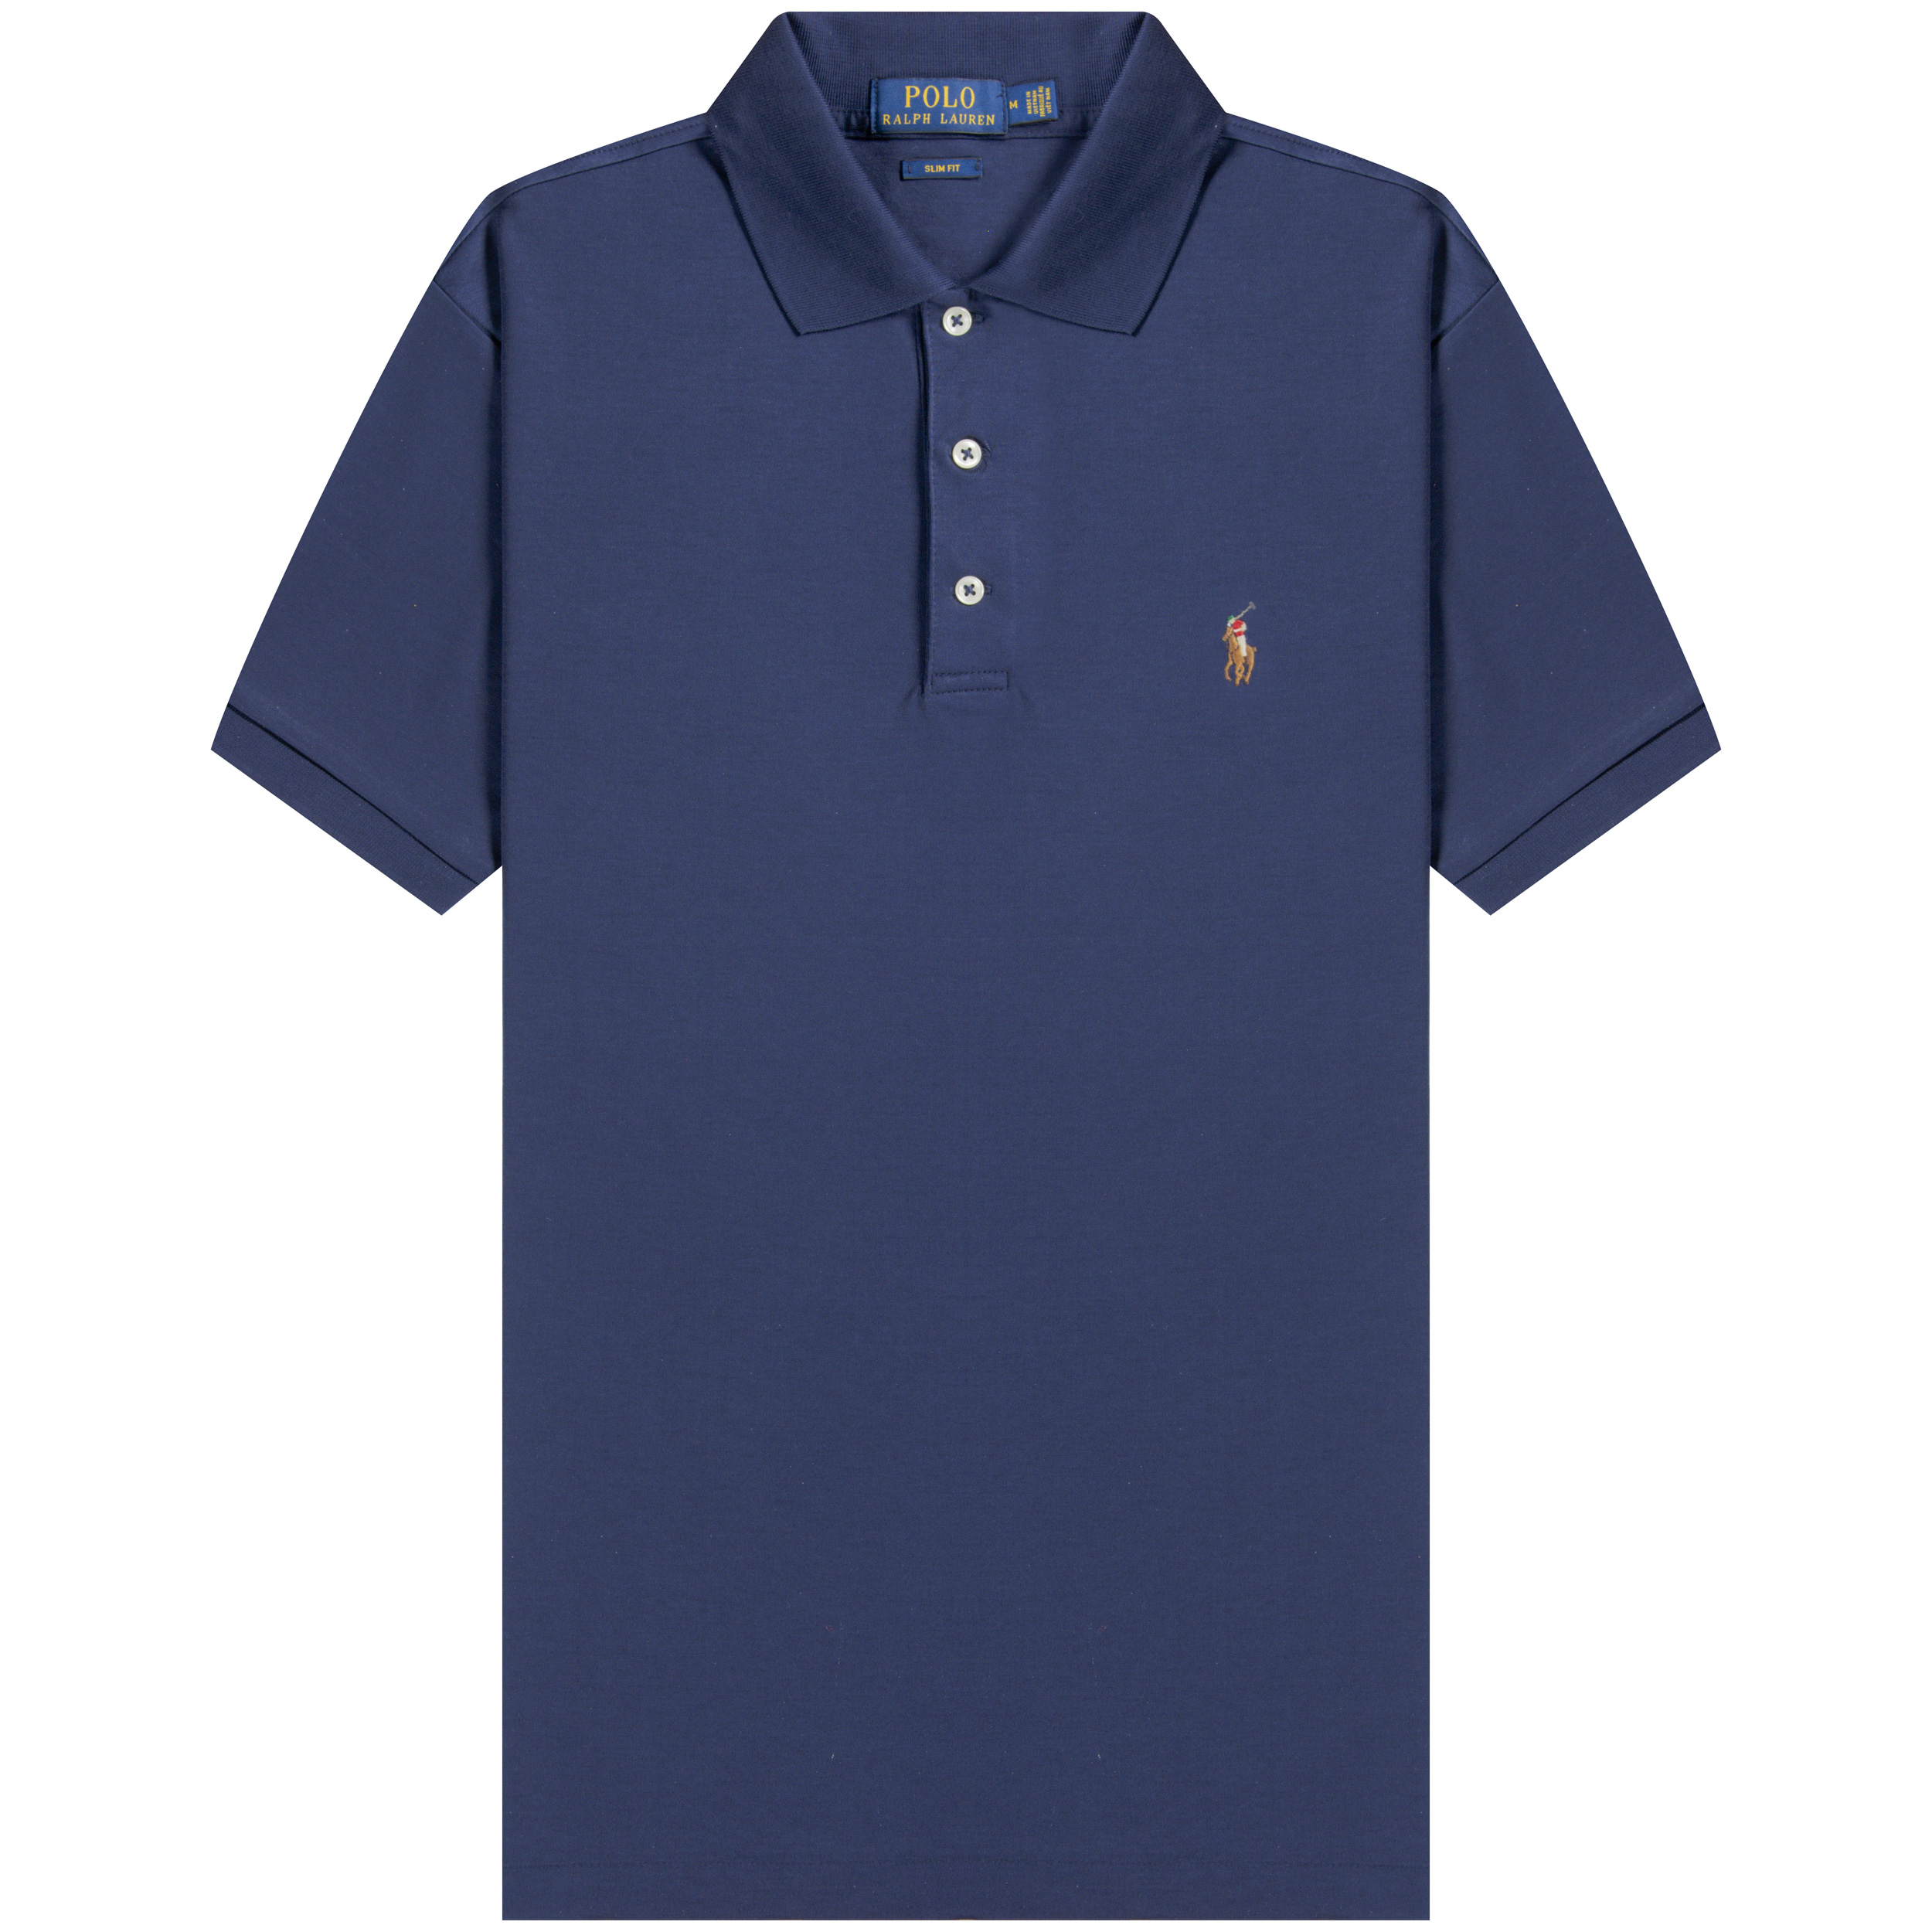 Polo Ralph Lauren ’Slim Fit’ Soft Touch Polo Navy